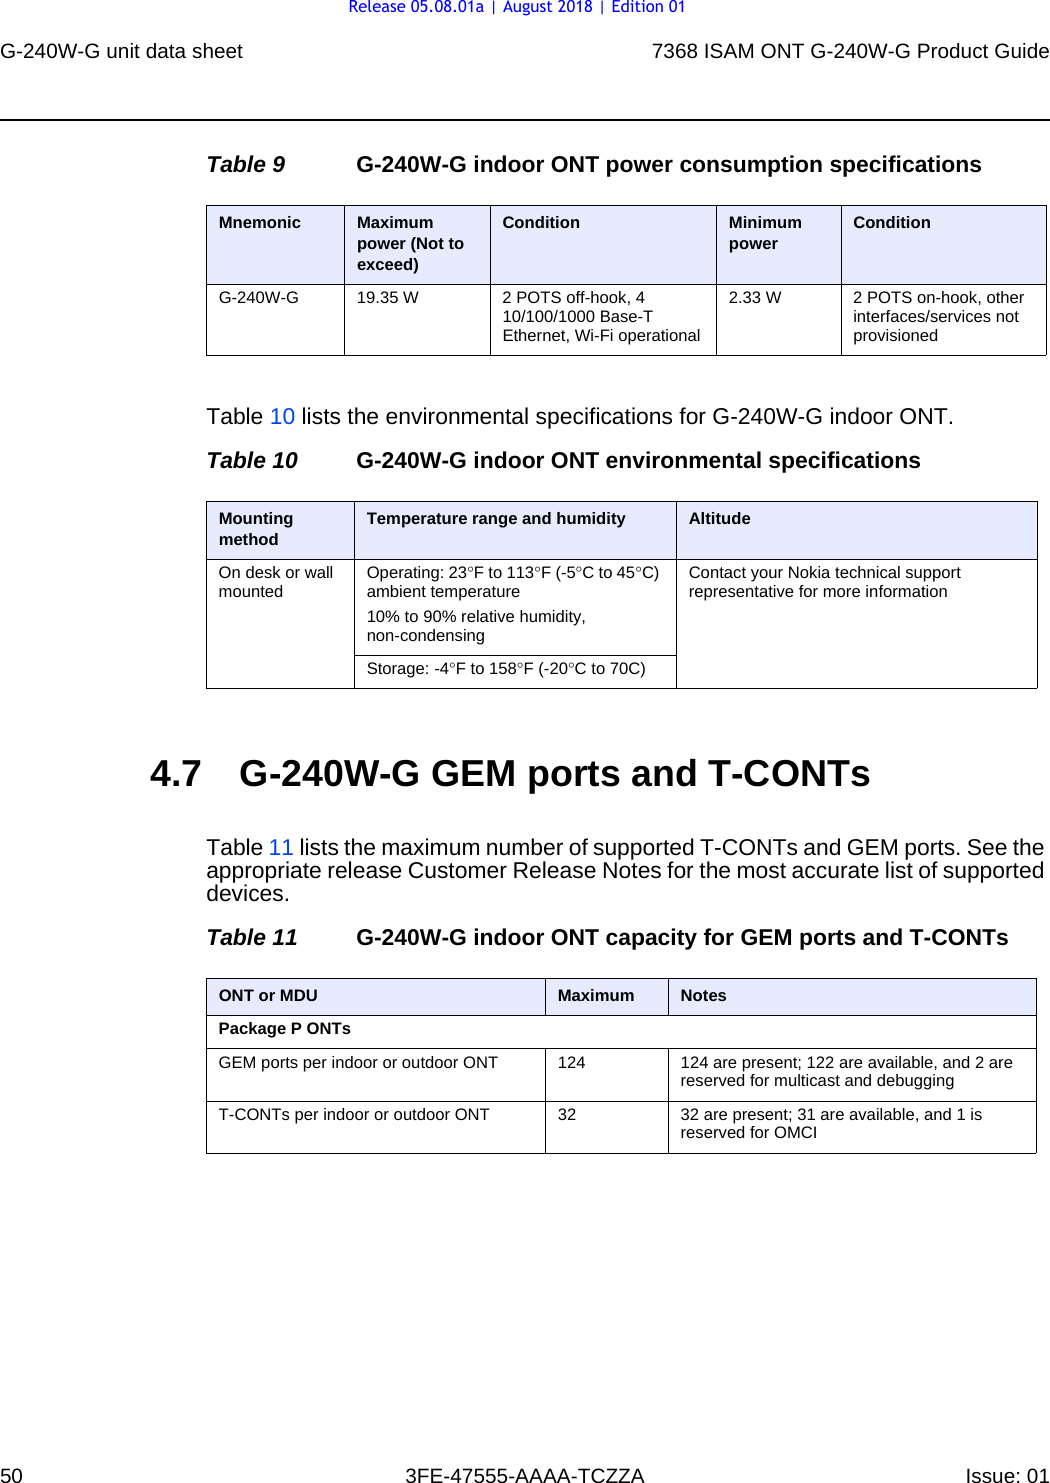 G-240W-G unit data sheet507368 ISAM ONT G-240W-G Product Guide3FE-47555-AAAA-TCZZA Issue: 01 Table 9 G-240W-G indoor ONT power consumption specificationsTable 10 lists the environmental specifications for G-240W-G indoor ONT.Table 10 G-240W-G indoor ONT environmental specifications4.7 G-240W-G GEM ports and T-CONTsTable 11 lists the maximum number of supported T-CONTs and GEM ports. See the appropriate release Customer Release Notes for the most accurate list of supported devices.Table 11 G-240W-G indoor ONT capacity for GEM ports and T-CONTsMnemonic Maximum power (Not to exceed)Condition Minimum power ConditionG-240W-G 19.35 W 2 POTS off-hook, 4 10/100/1000 Base-T Ethernet, Wi-Fi operational2.33 W 2 POTS on-hook, other interfaces/services not provisionedMounting method Temperature range and humidity AltitudeOn desk or wall mounted Operating: 23°F to 113°F (-5°C to 45°C) ambient temperature10% to 90% relative humidity, non-condensingContact your Nokia technical support representative for more informationStorage: -4°F to 158°F (-20°C to 70C)ONT or MDU Maximum NotesPackage P ONTsGEM ports per indoor or outdoor ONT 124  124 are present; 122 are available, and 2 are reserved for multicast and debuggingT-CONTs per indoor or outdoor ONT 32 32 are present; 31 are available, and 1 is reserved for OMCIRelease 05.08.01a | August 2018 | Edition 01